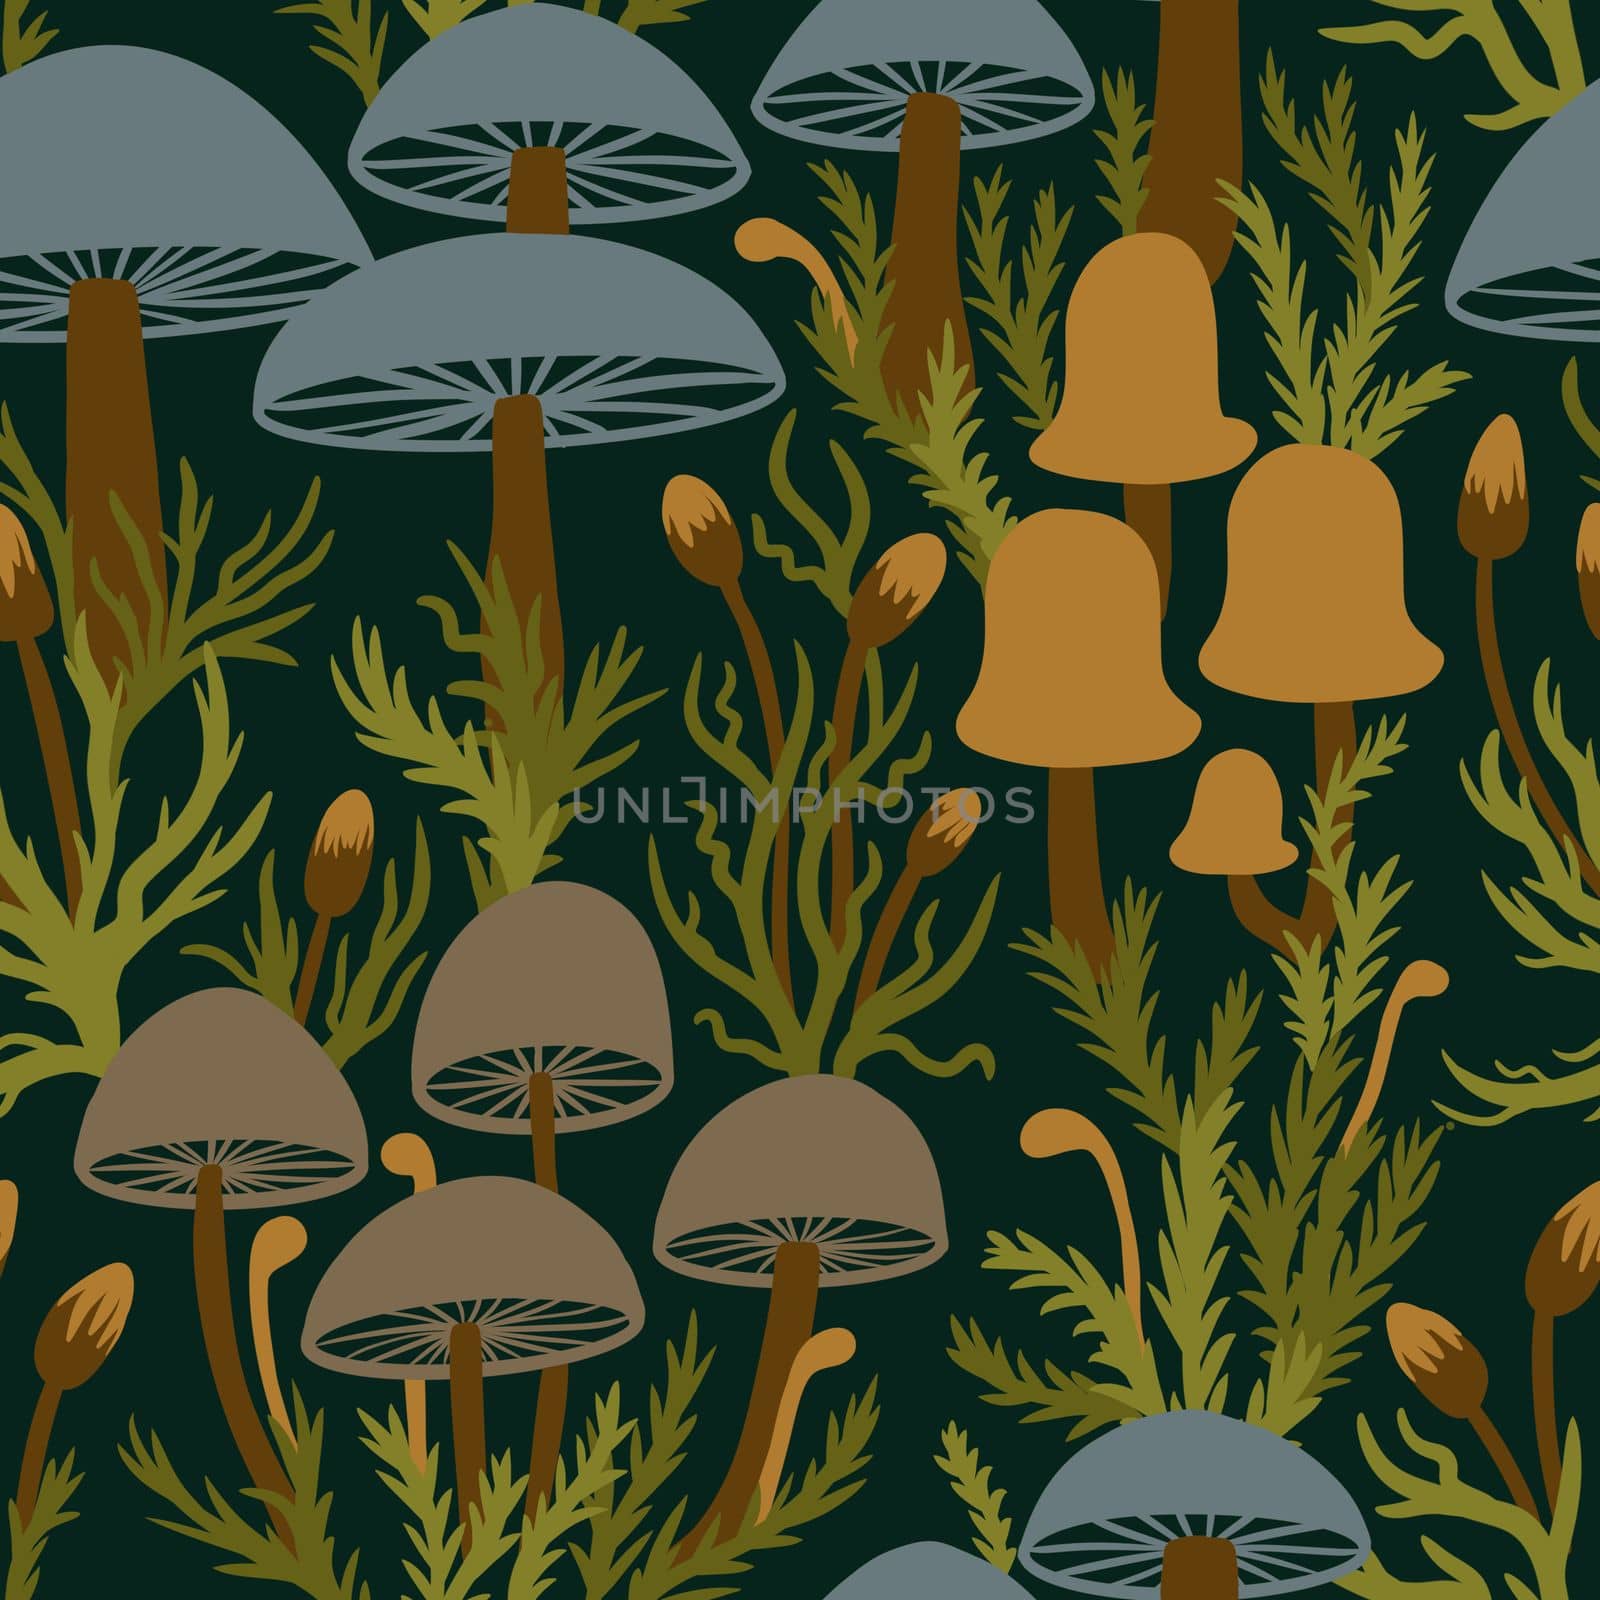 Hand drawn seamless pattern with forest mushroom fungi in grey blue brown on dark green moss background. Toadstool toxic fungi caps poisonous herbs wood woodland, witch concept, fall autumn flora design. by Lagmar